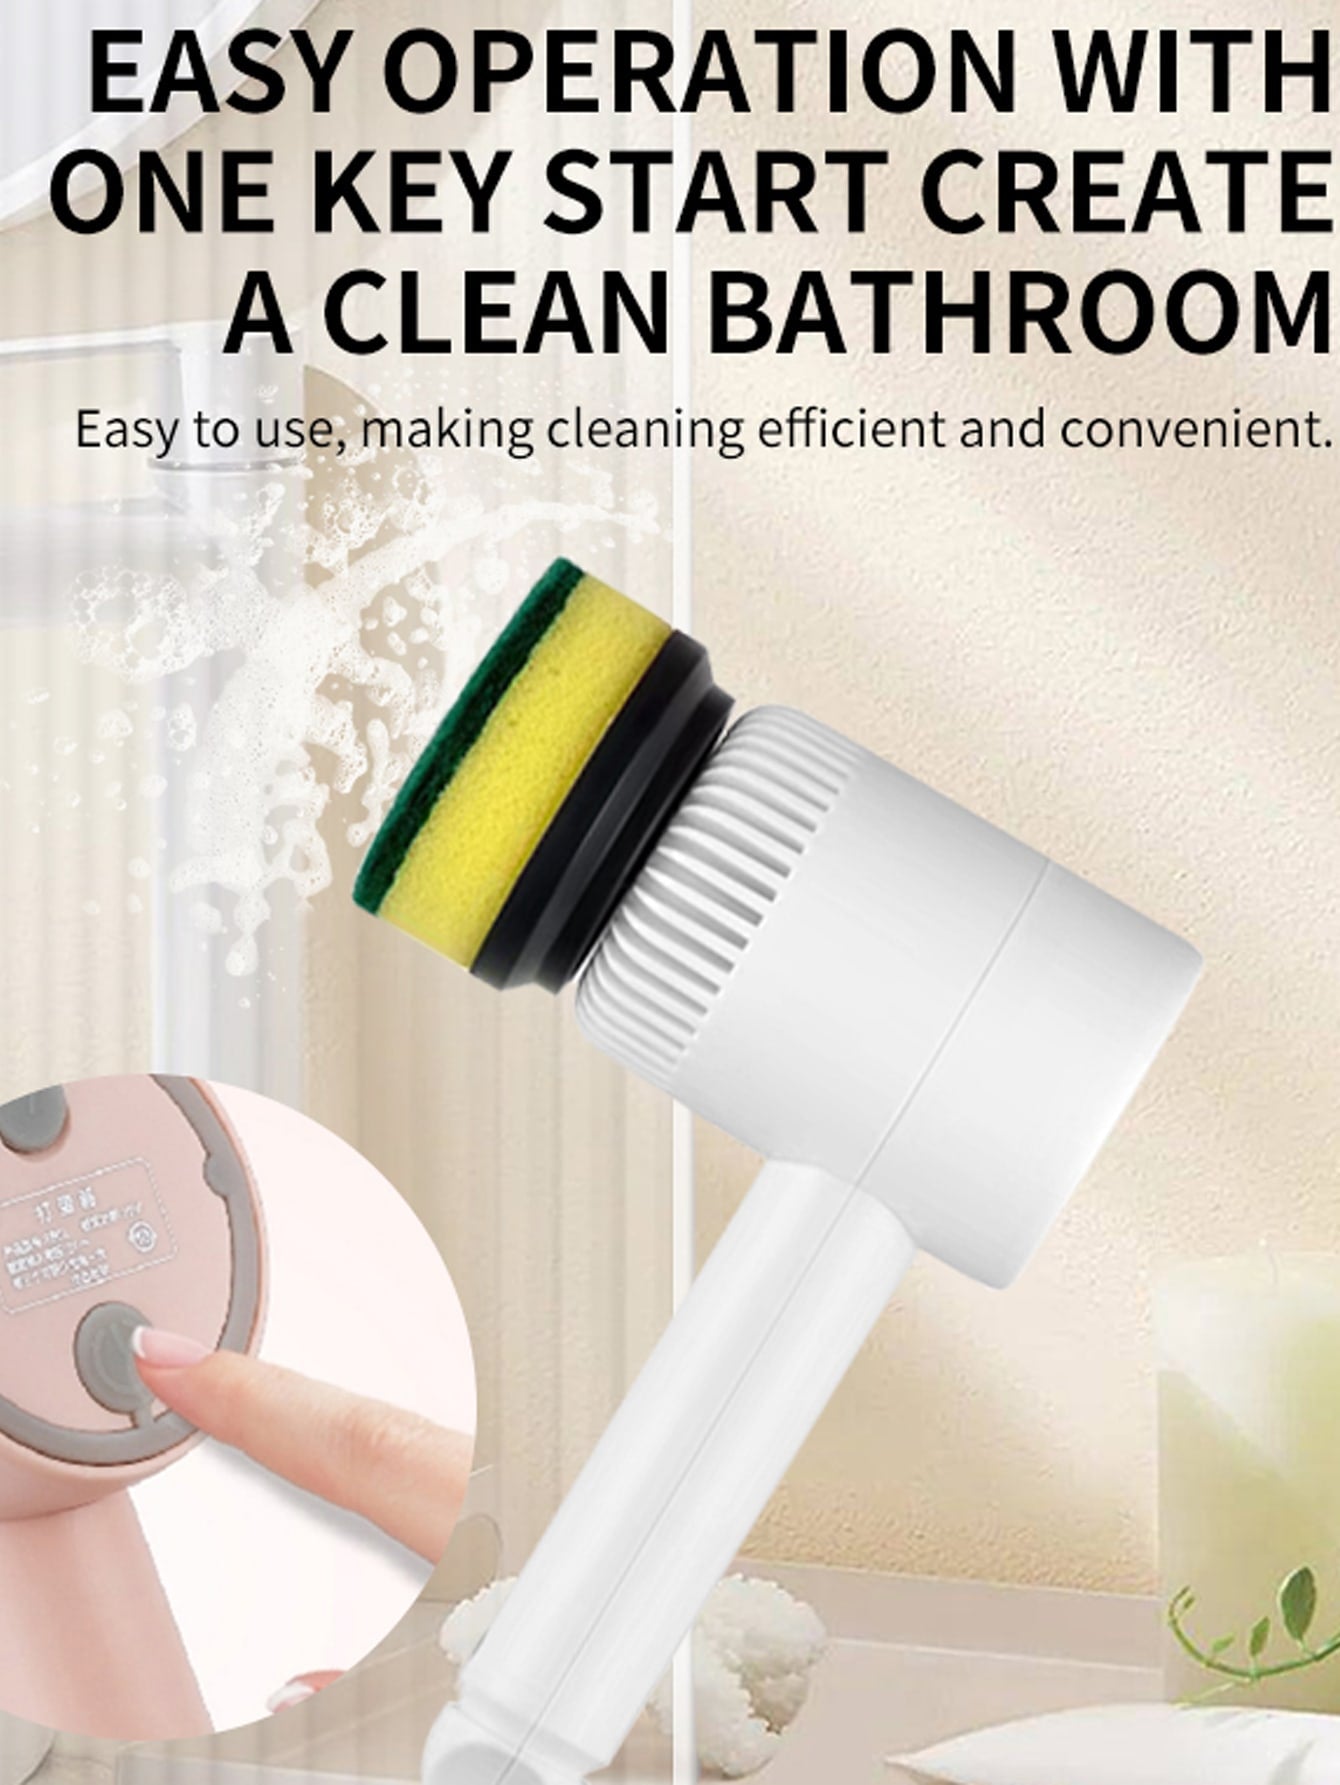 Rechargeable Electric Rotary Scrubber, With 4 Replaceable Cleaning Heads, Power Shower Scrubber For Bathroom Floor Tile Car Tub-Host + 4 brush heads + green-3